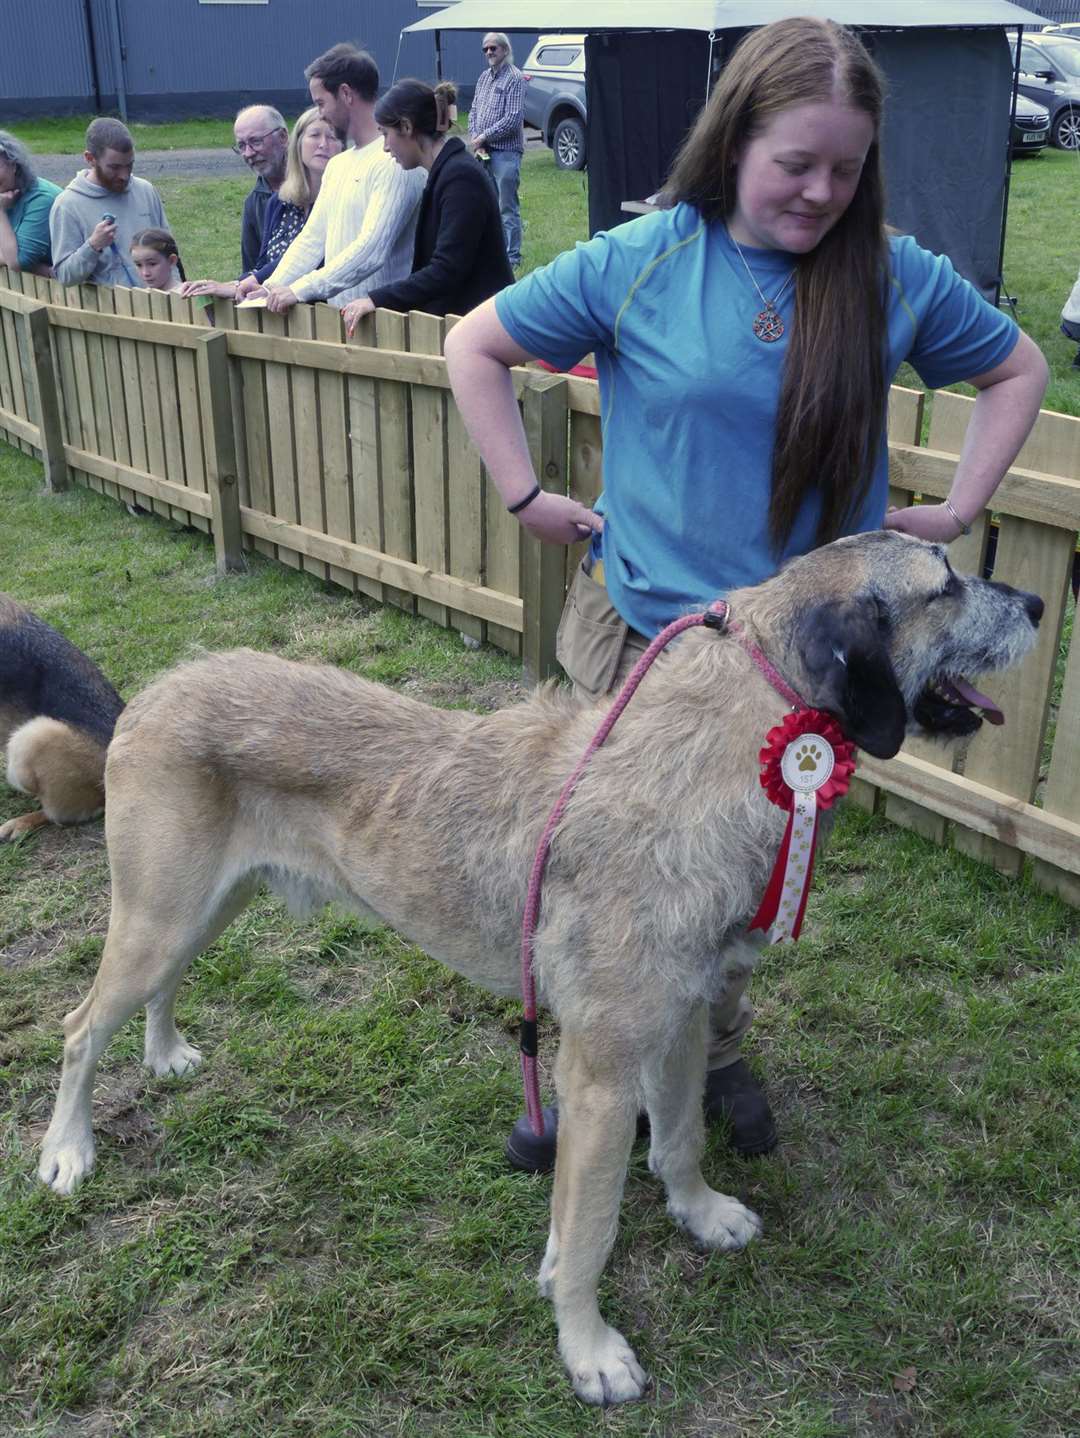 The handsomest dog, on the day, was named as best in show Harold, a Great Dane and Irish Wolfhound cross owned by Holly Pullen.